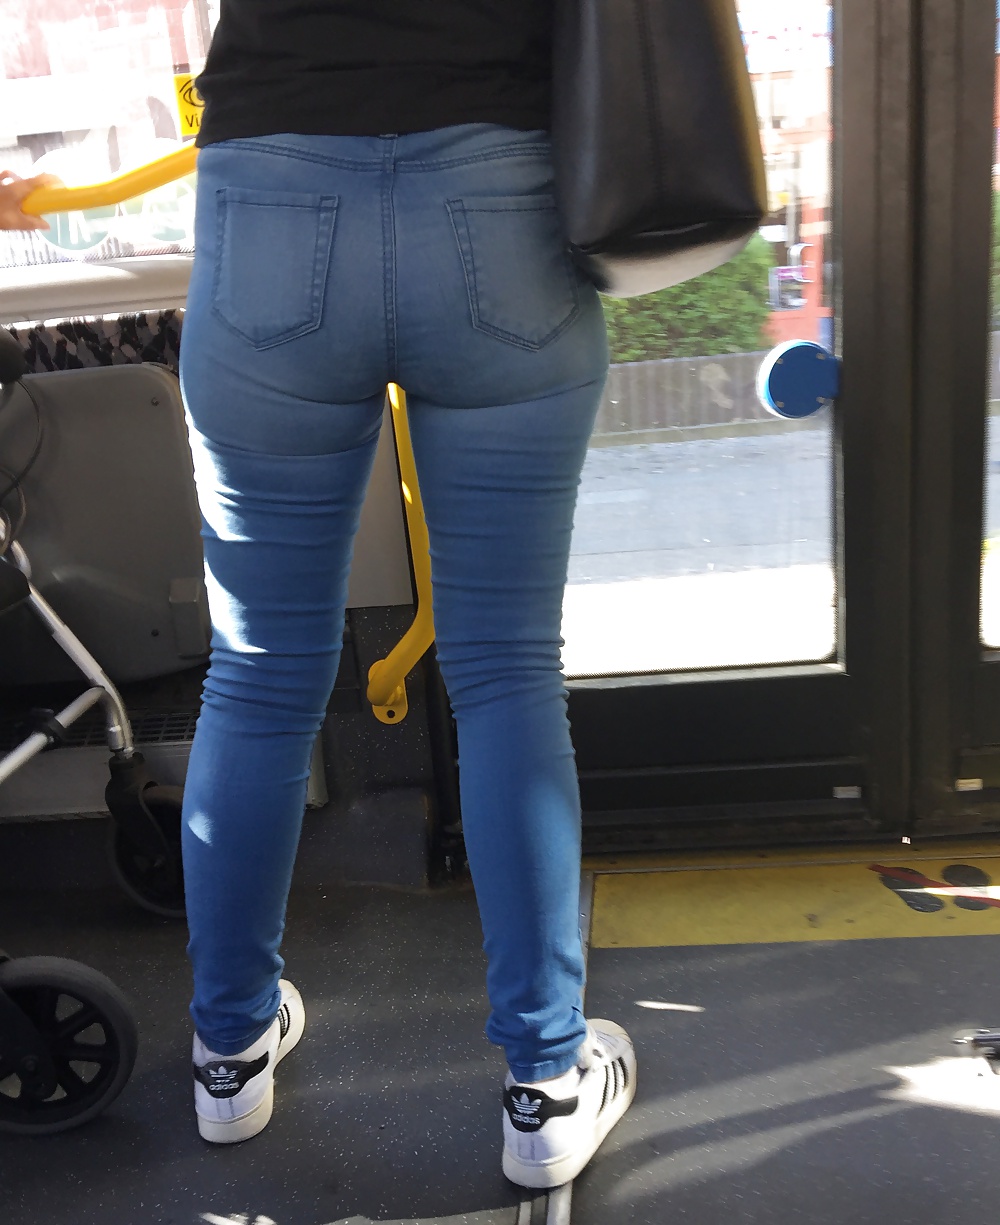 Sexy Ass in tight Jeans - Berlin Bus  (6/8)